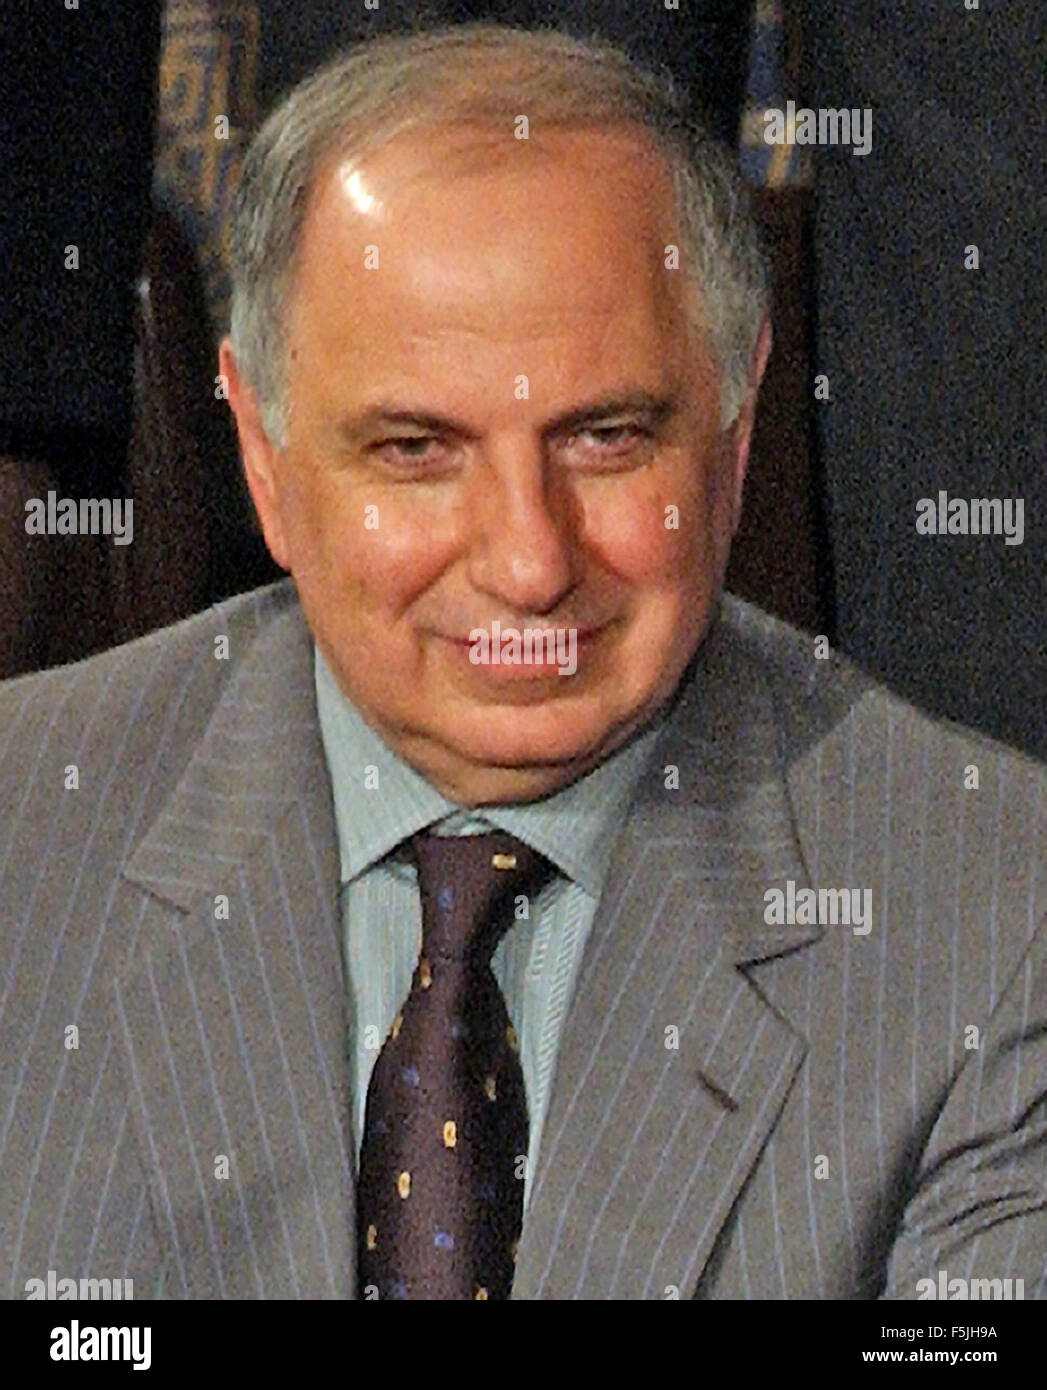 In this file photo from January 20, 2004, Doctor Ahmed Chalabi, Iraqi Governing Council is pictured as he joined first lady Laura Bush for United States President George W. Bush's 2004 State of the Union Address to a Joint Session of the United States Congress at the Capitol in Washington, DC. Iraqi state media reported Chalabi passed away from a heart attack on November 3, 2015. He was in his early 70s. Credit: Ron Sachs/CNP - NO WIRE SERVICE - Stock Photo